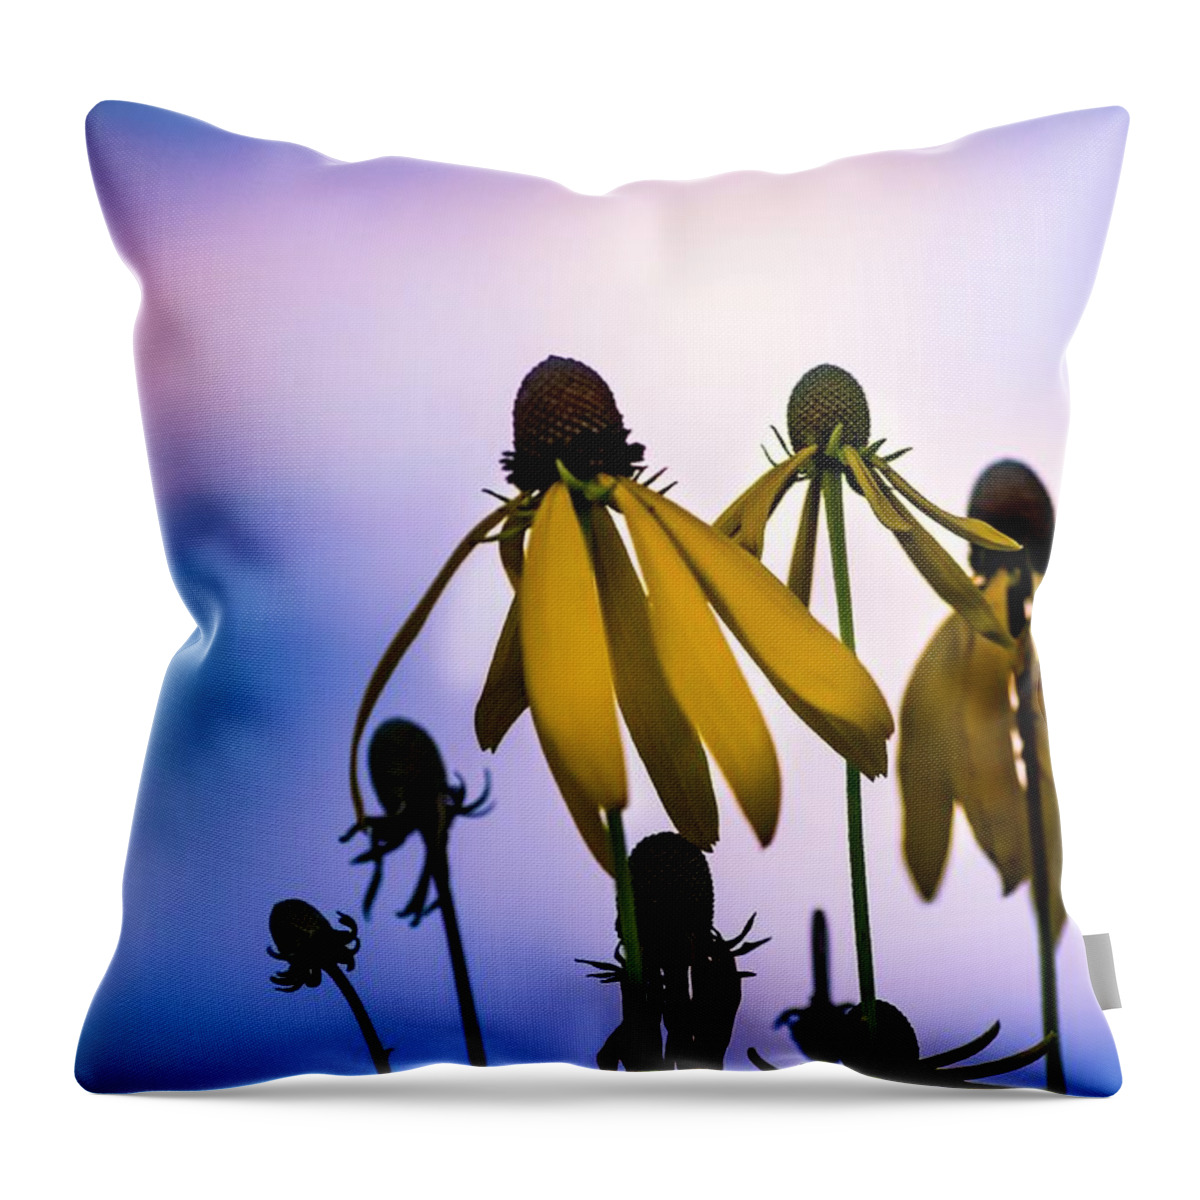  Throw Pillow featuring the photograph What Remains by Terri Hart-Ellis